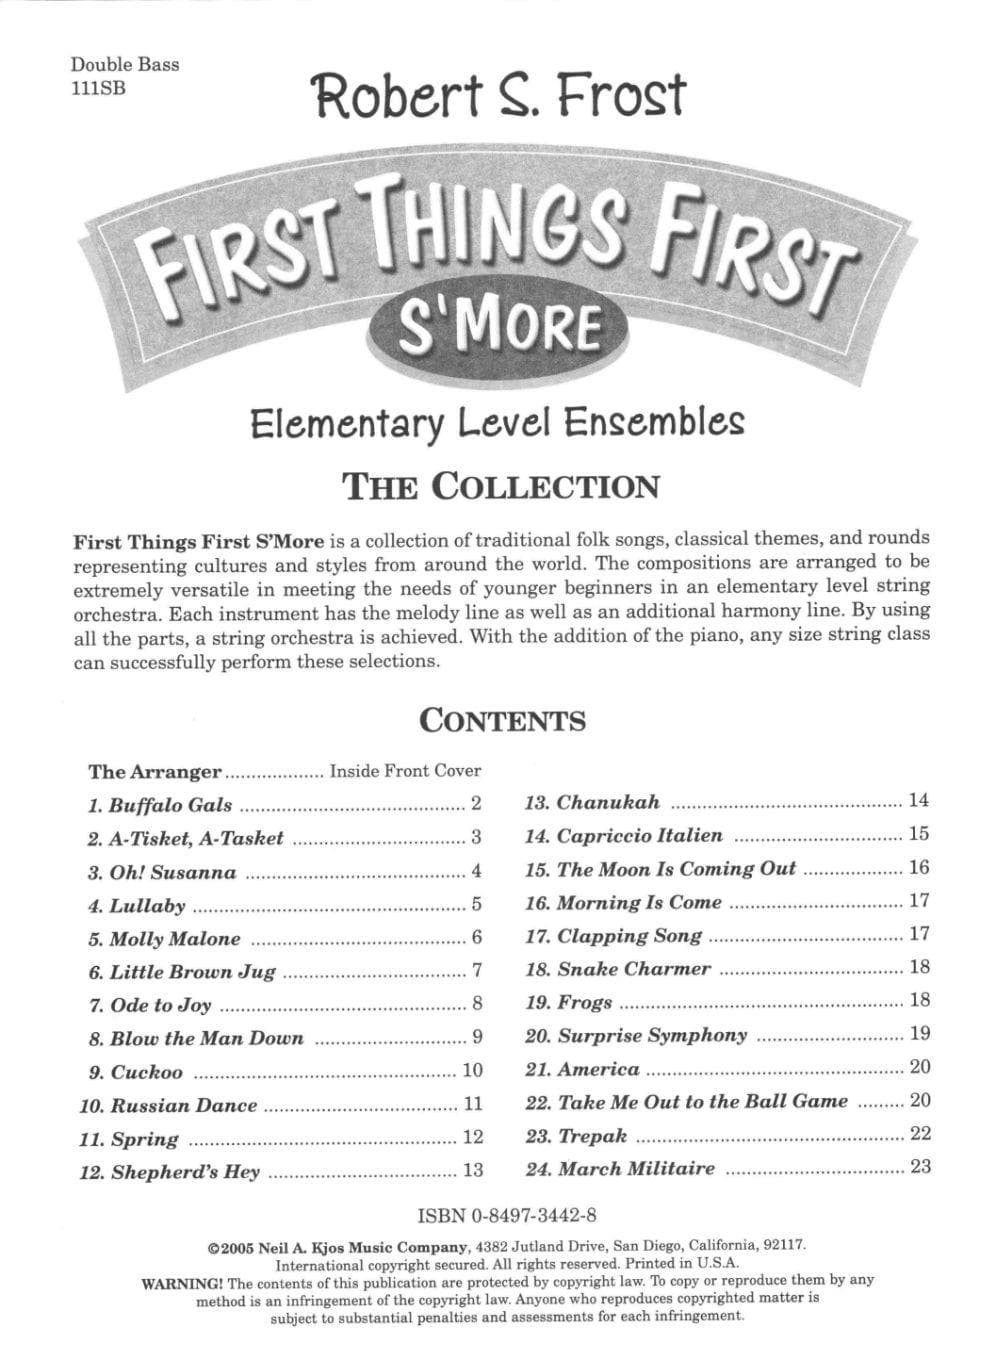 Frost, Robert S - First Things First: S'more (Book 2) - Bass - Neil A Kjos Music Co